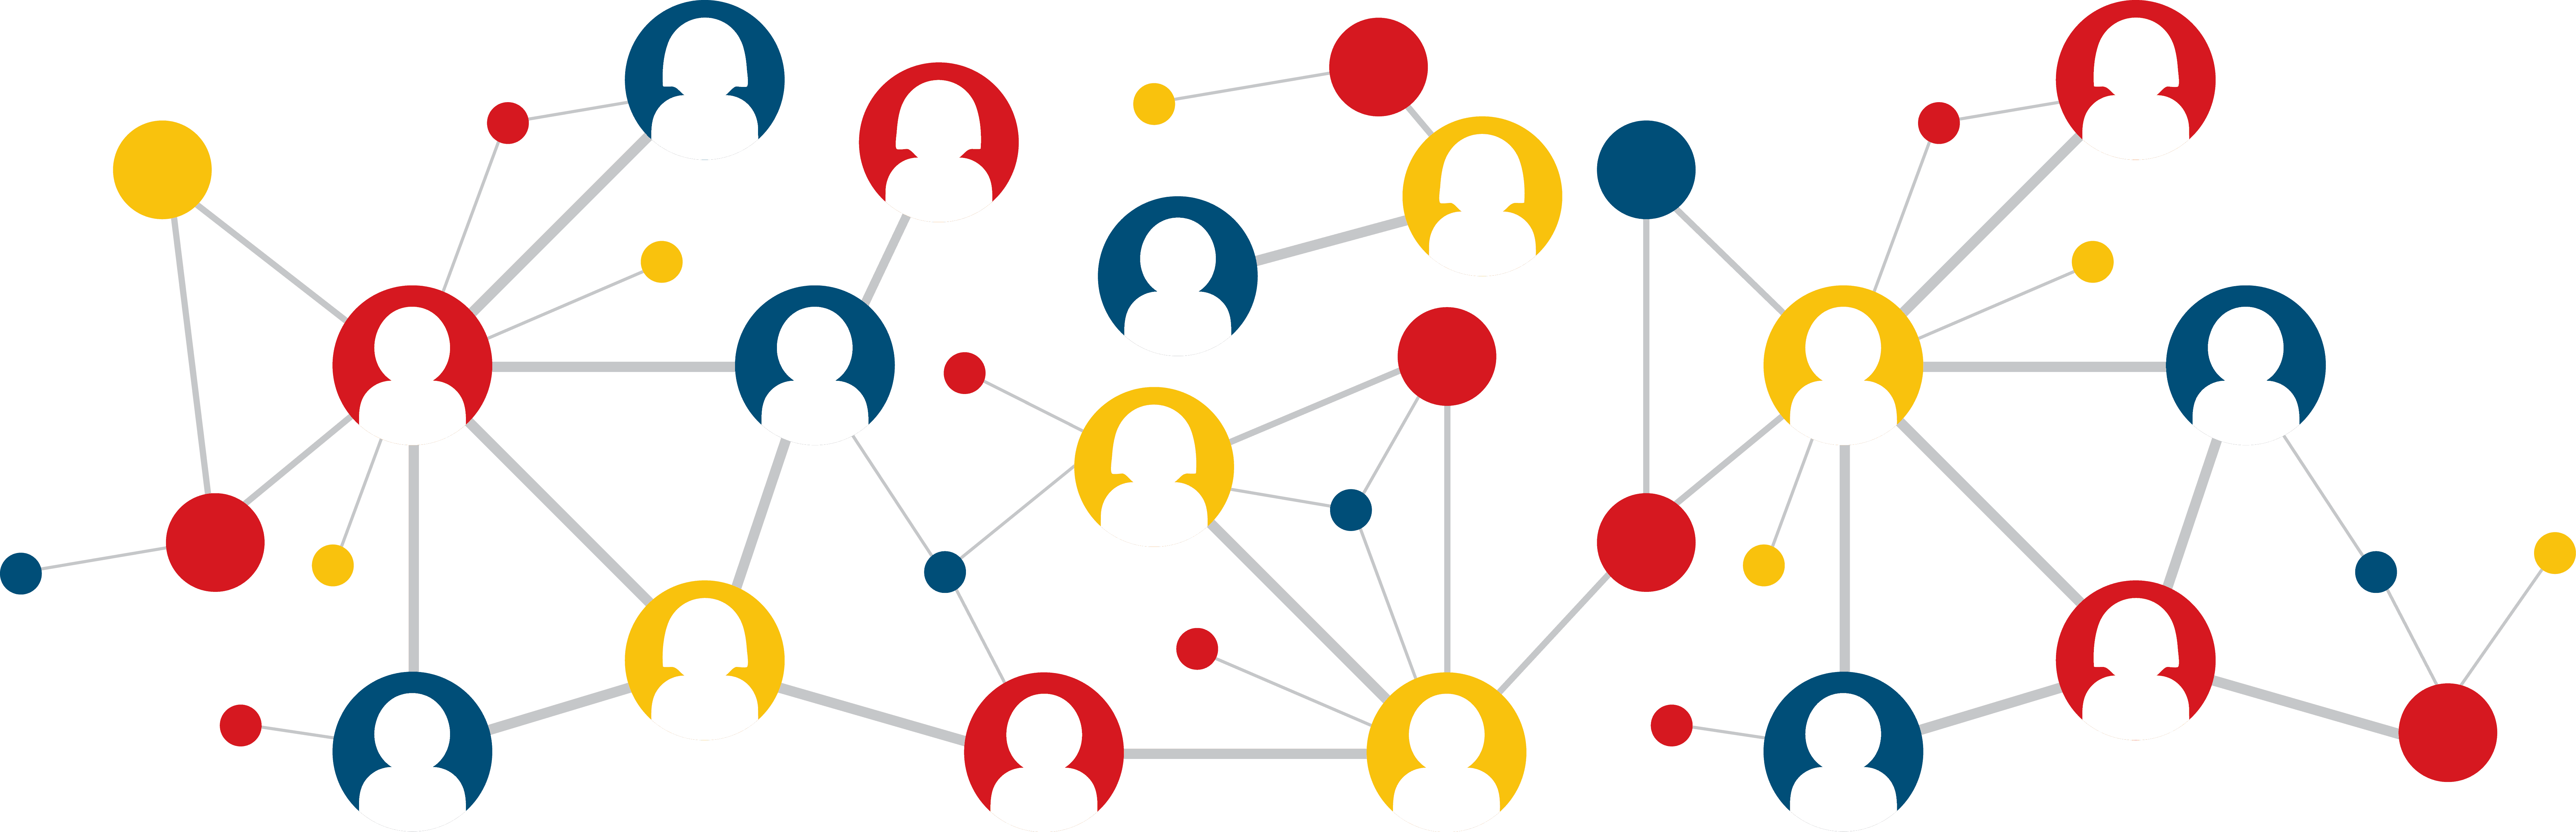 Social Network Connections Graphic PNG image